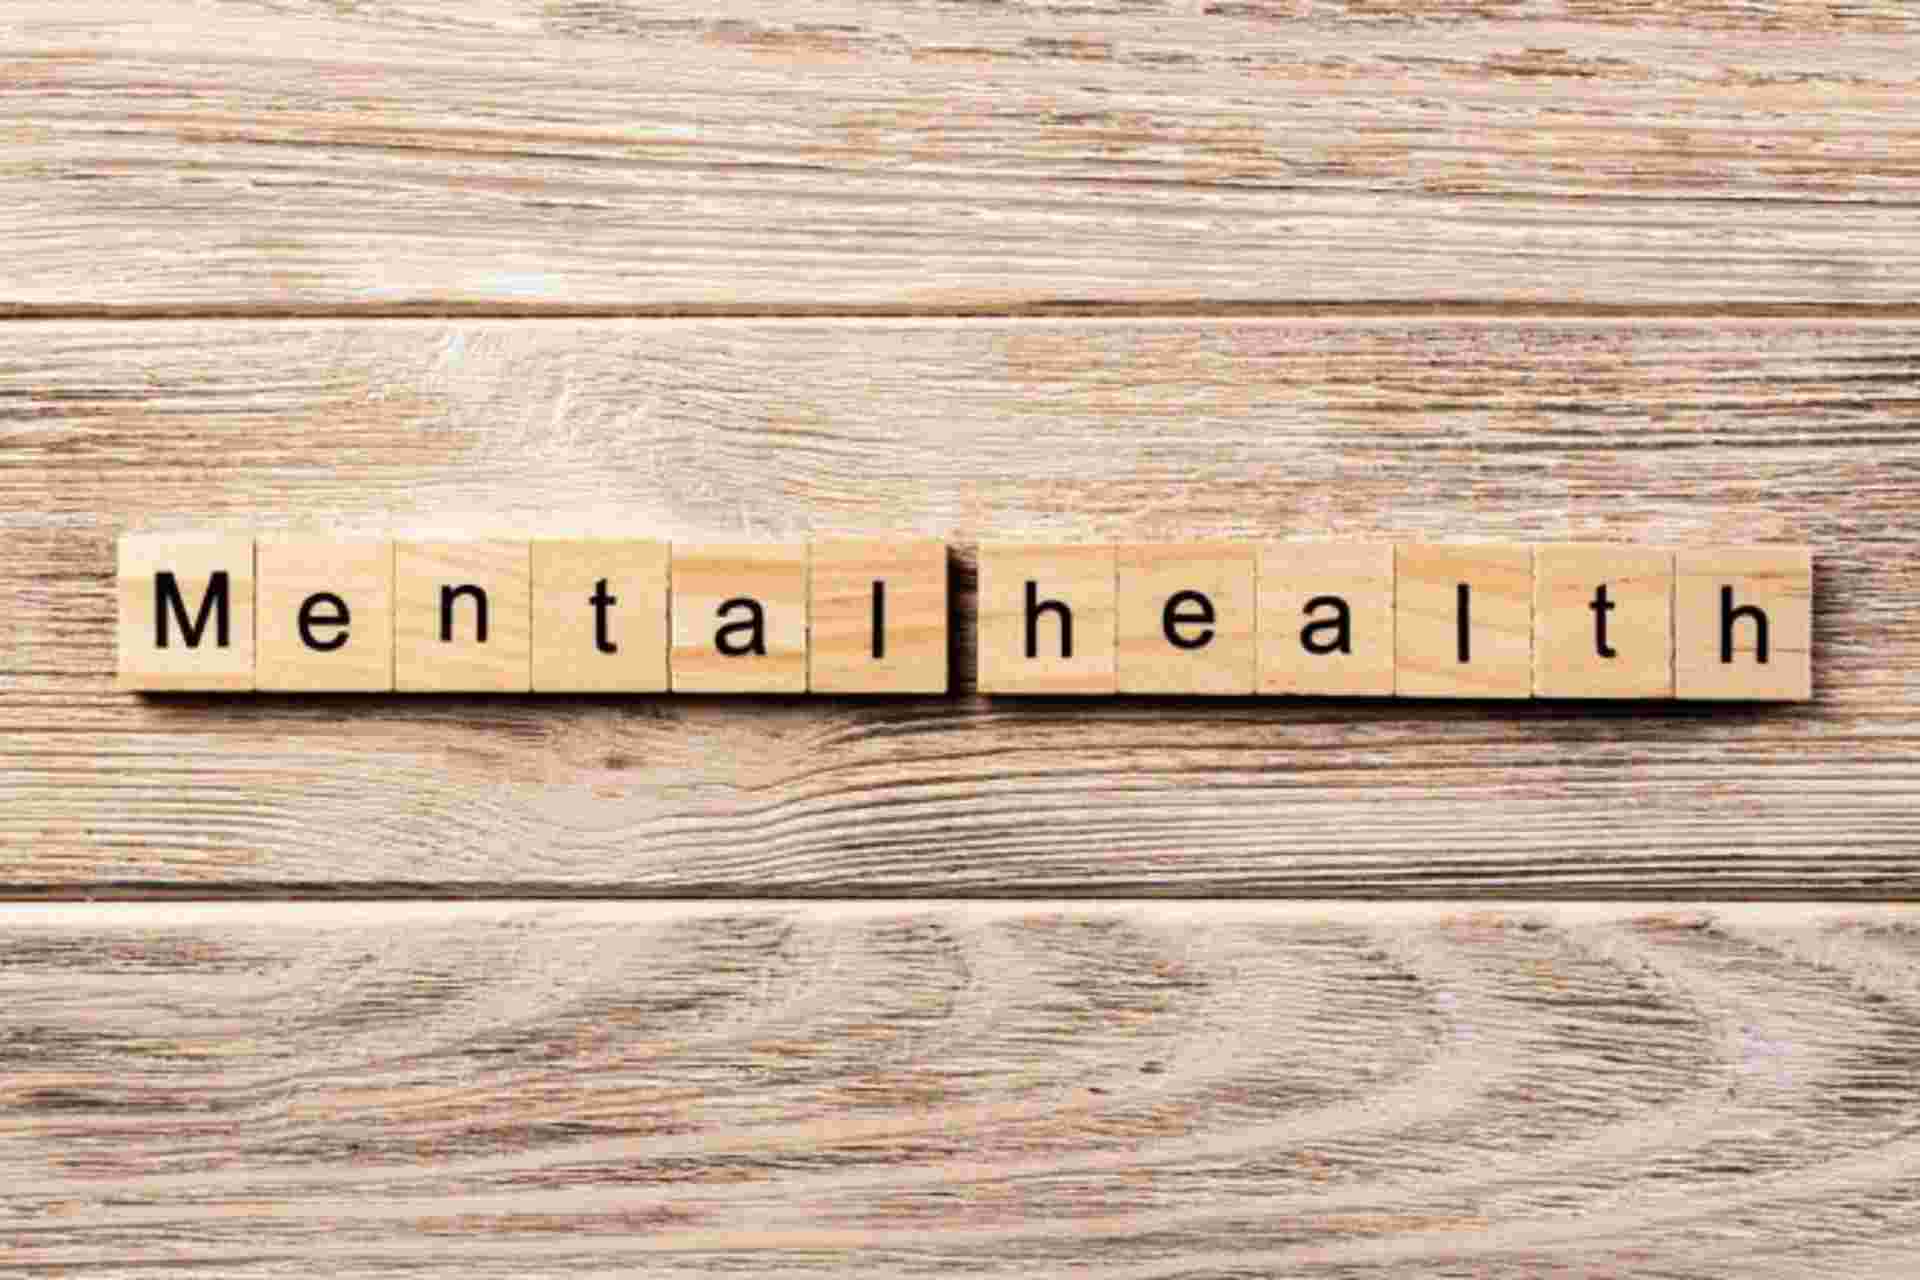 The importance of ‘Mental Health for All’